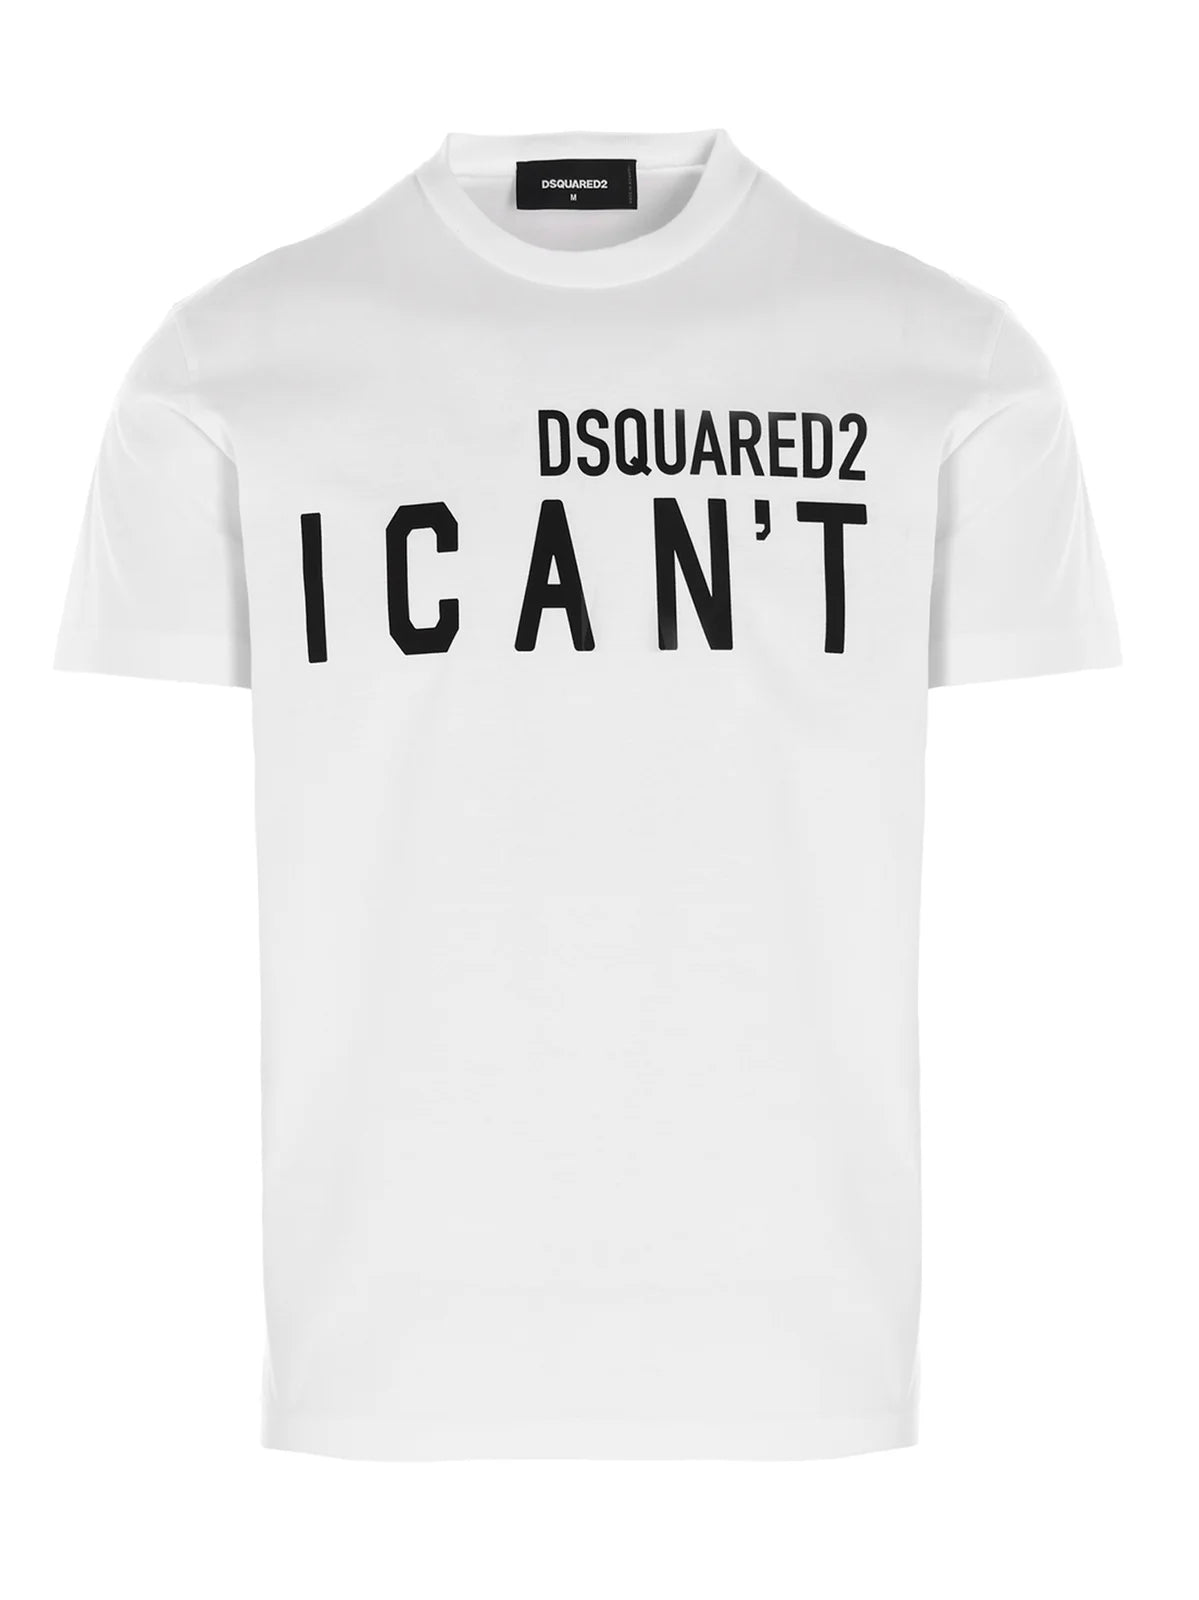 Dsquared2 I Can't Logo Printed T-Shirt in White